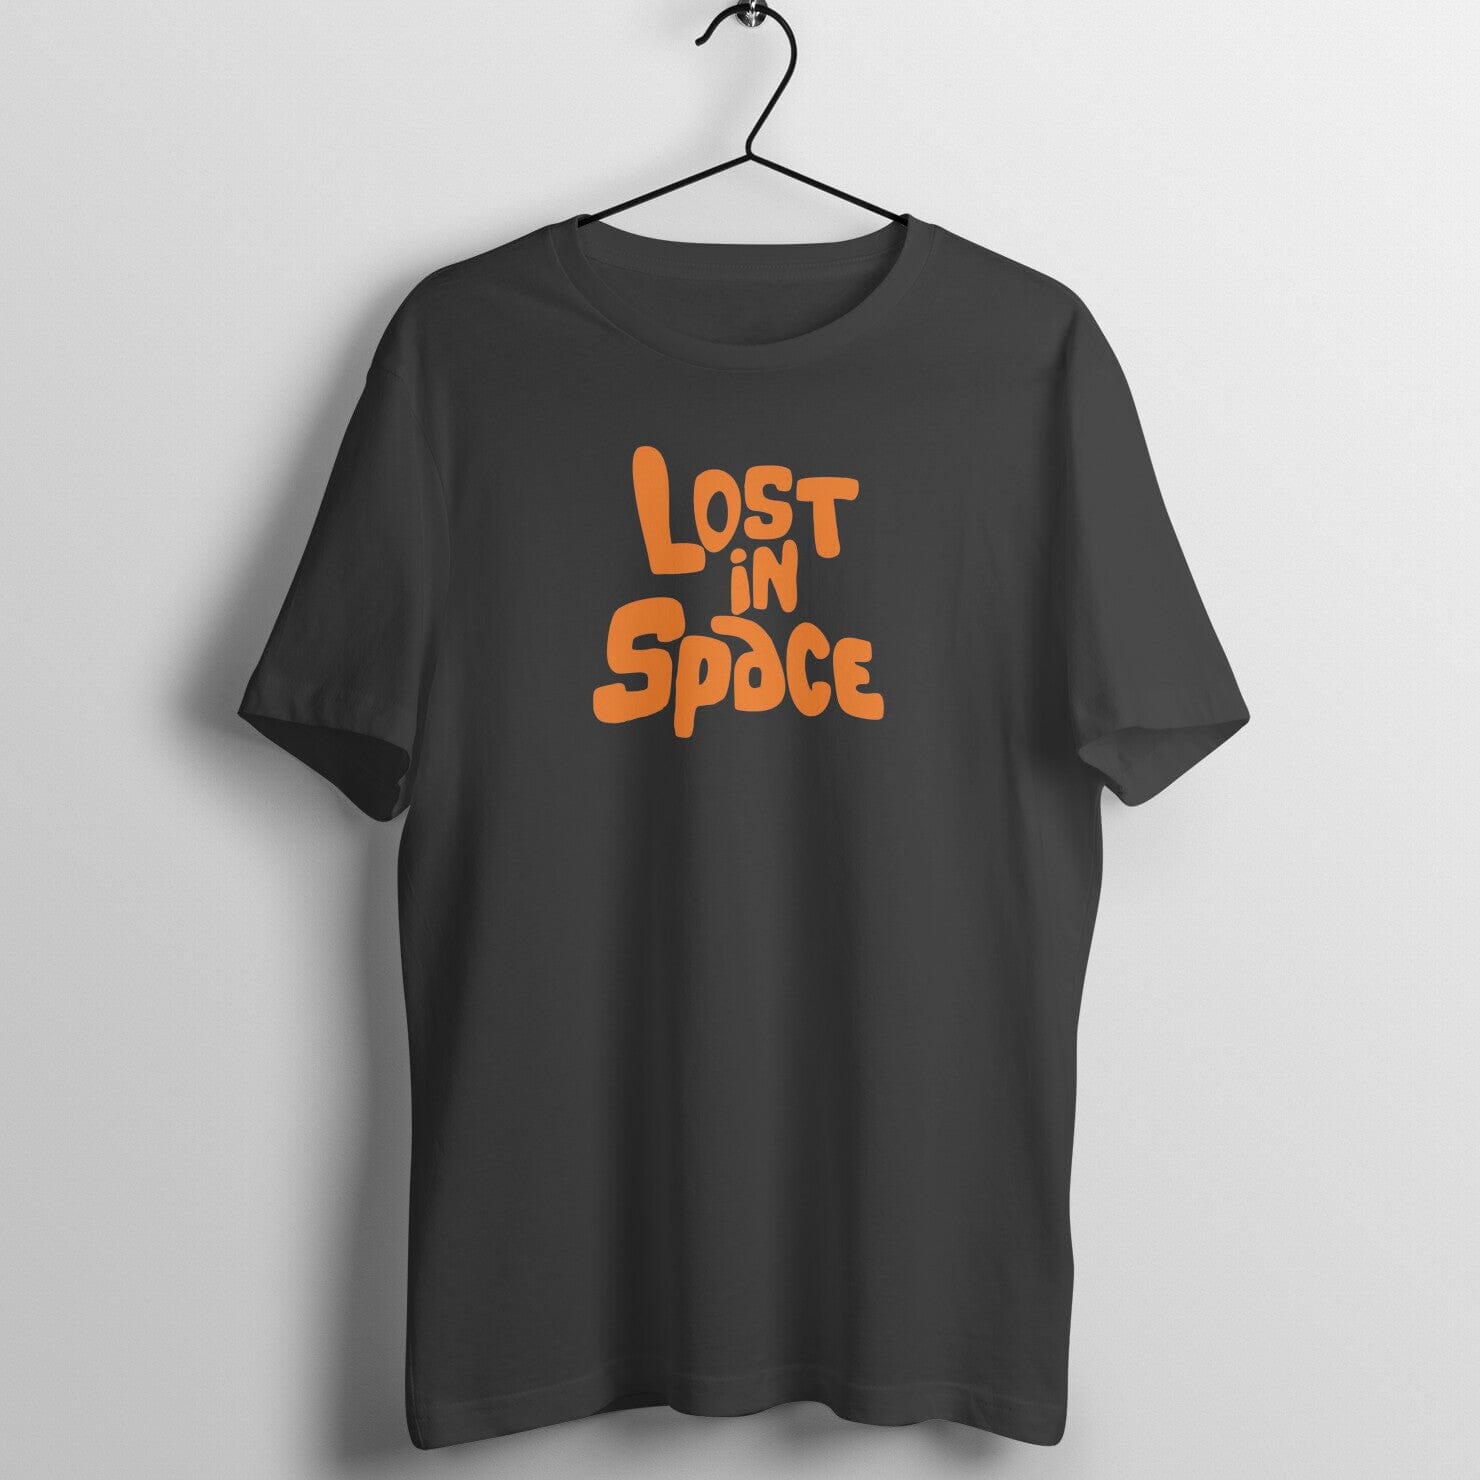 Lost in Space Exclusive Black T Shirt for Men and Women Printrove Black S 